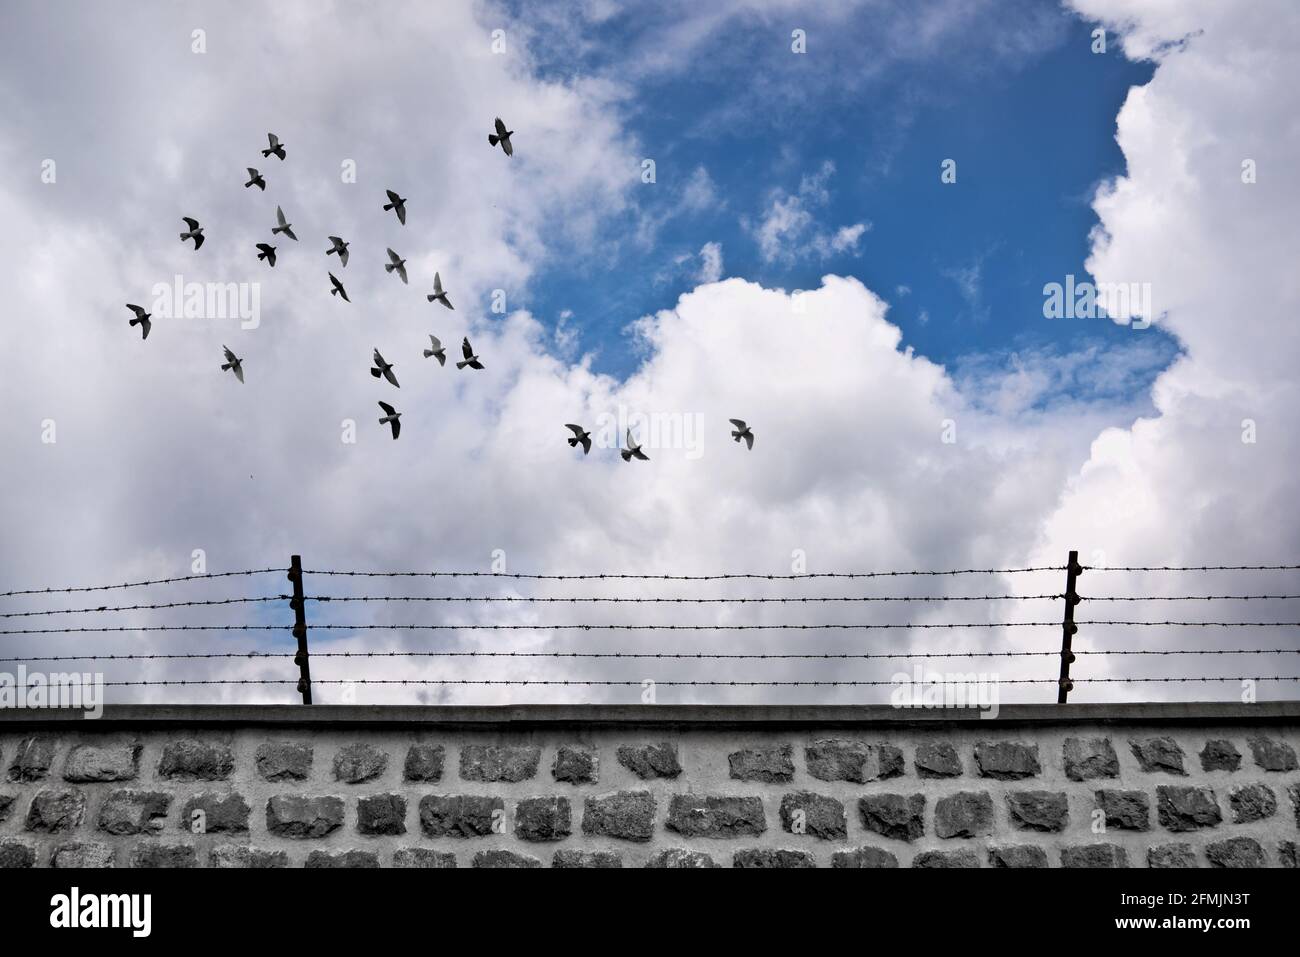 Flock od birds flying a wall with barbwire. Prison and freedom concept. Stock Photo